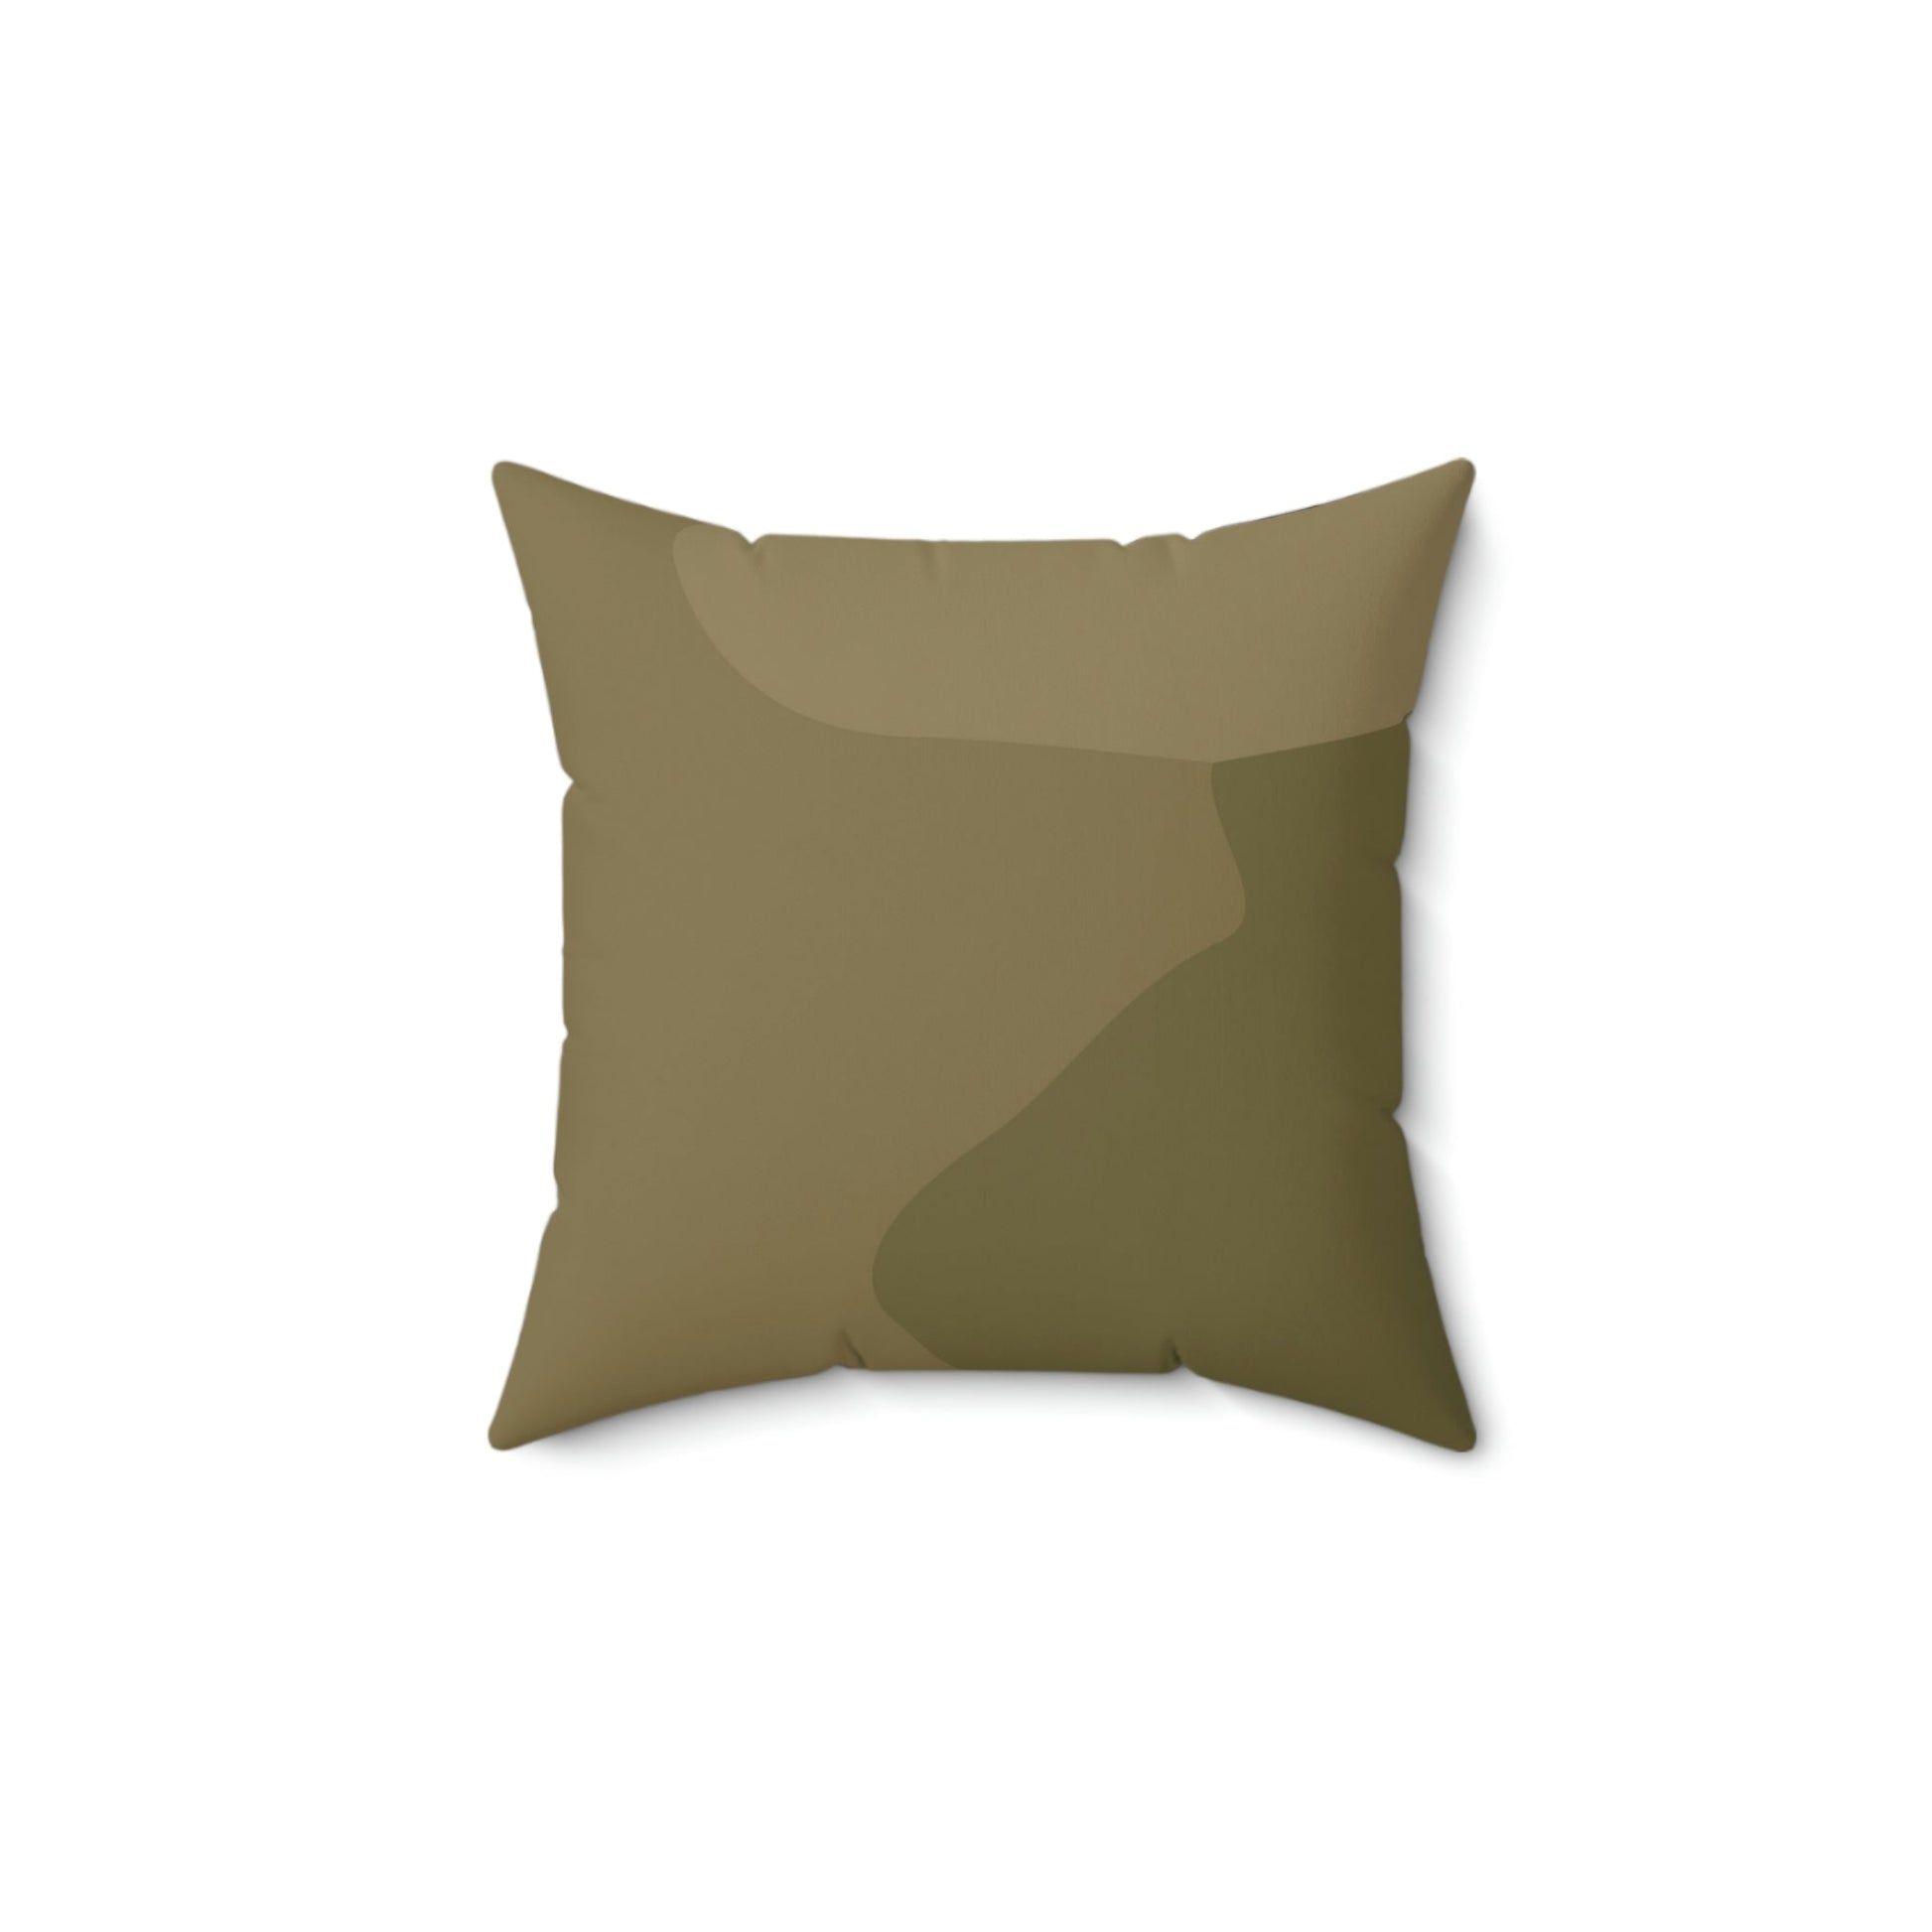 Army Fatigue Square Pillow Home Decor Pink Sweetheart